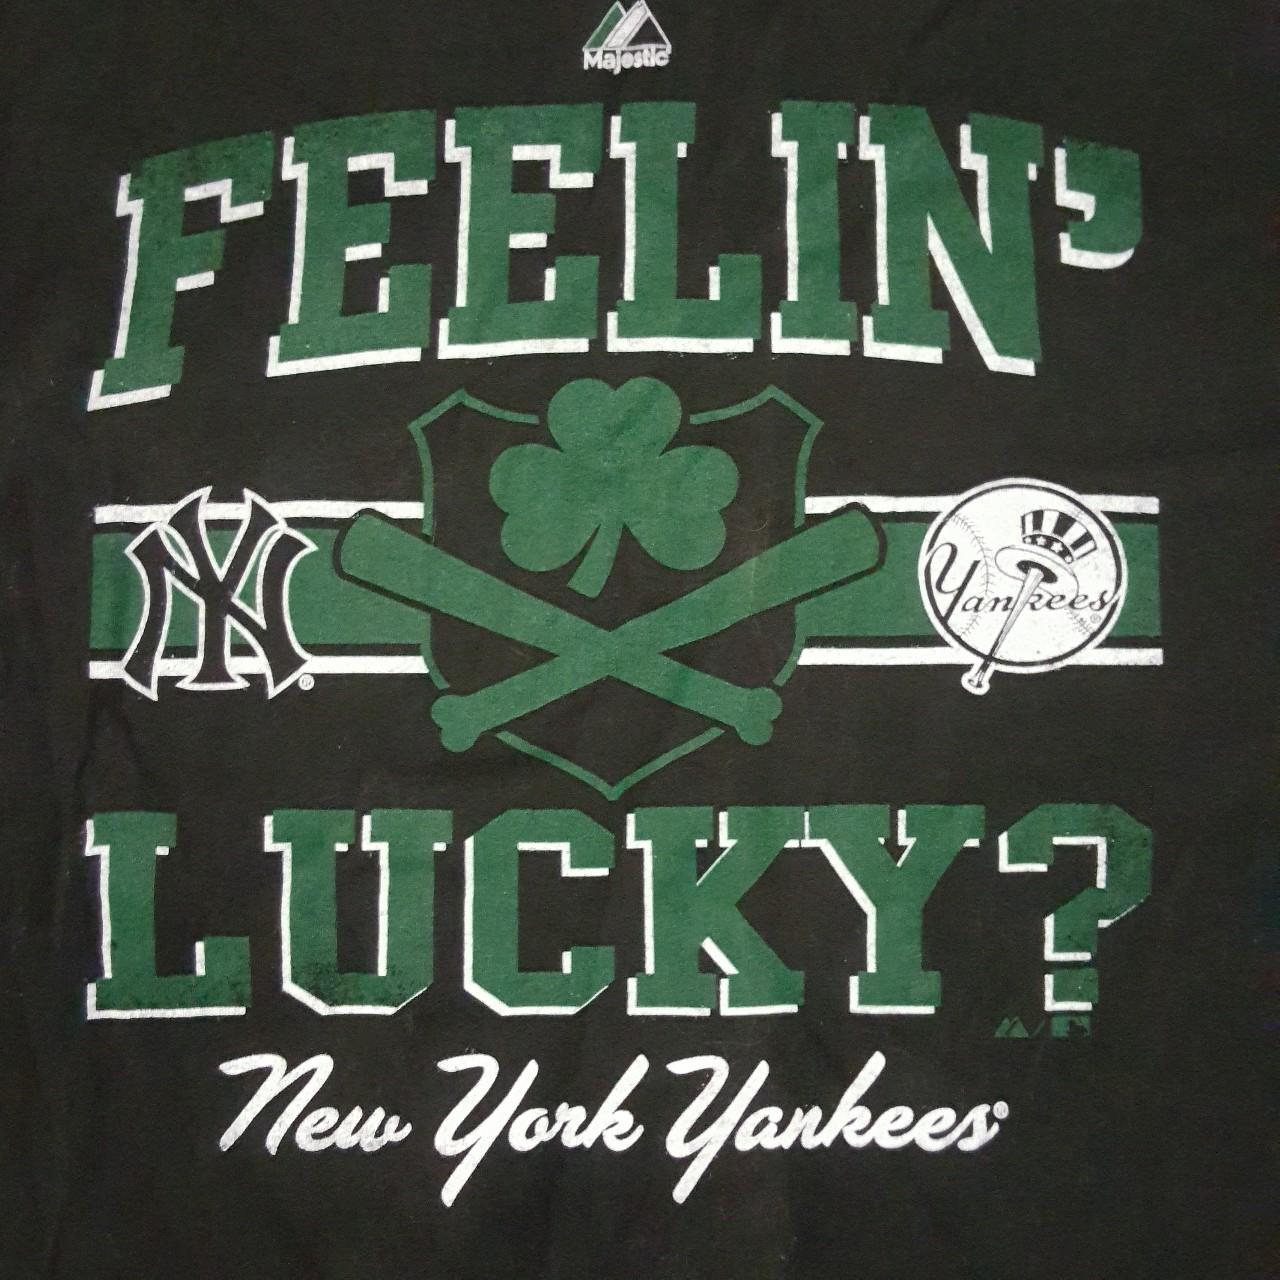 St. Patrick's Day shirts among the New York Yankees' and New York